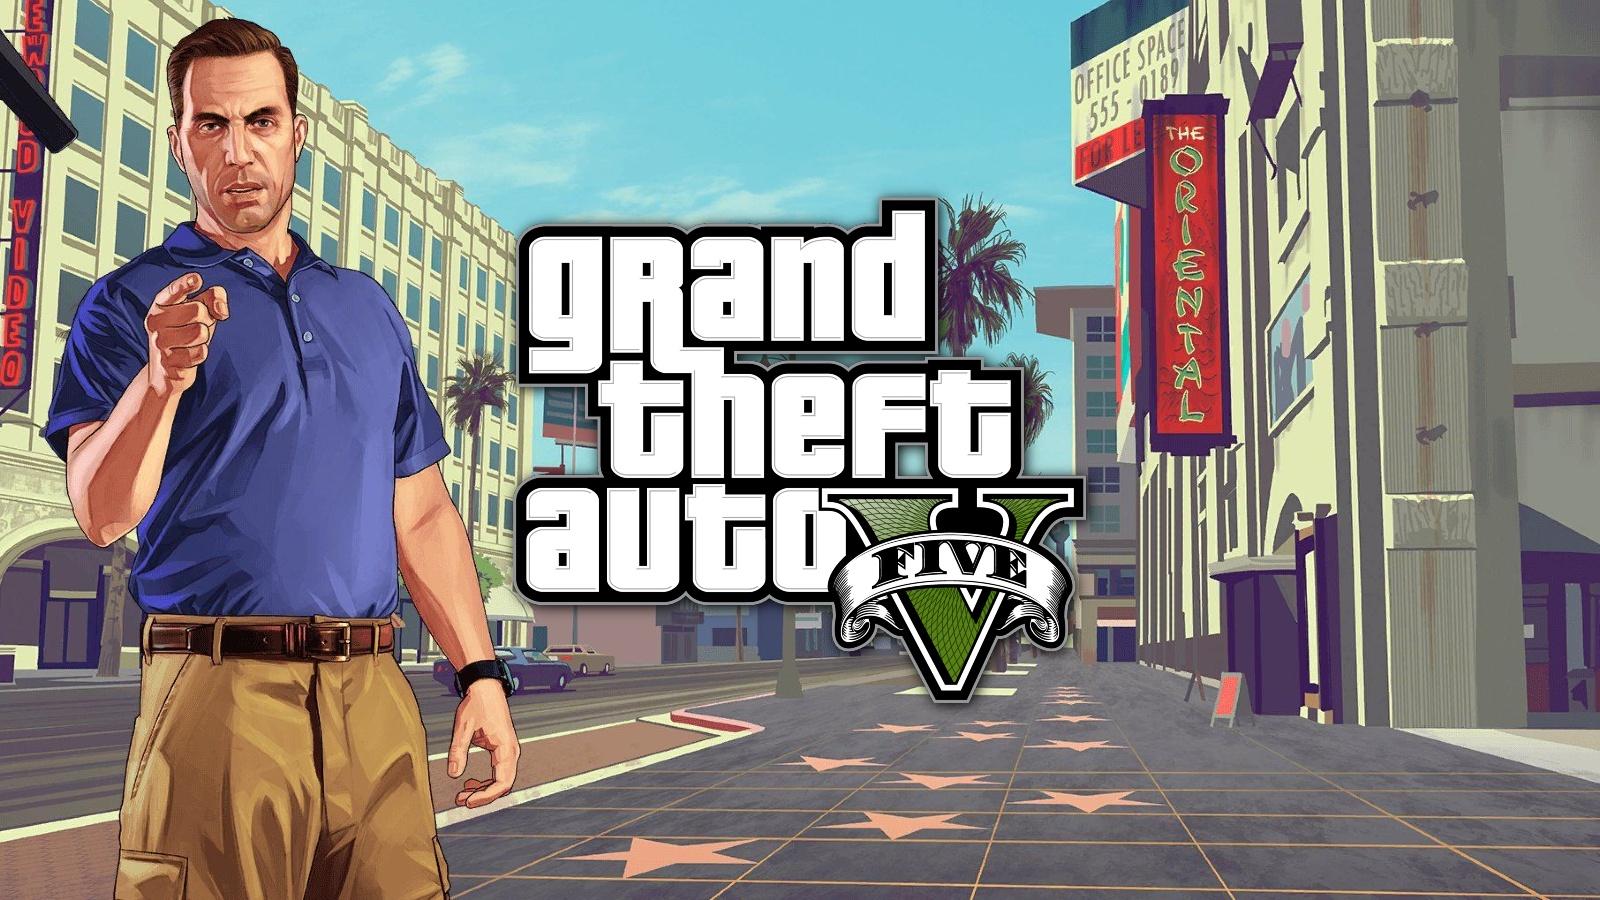 How to get GTA V for Free from epic Games